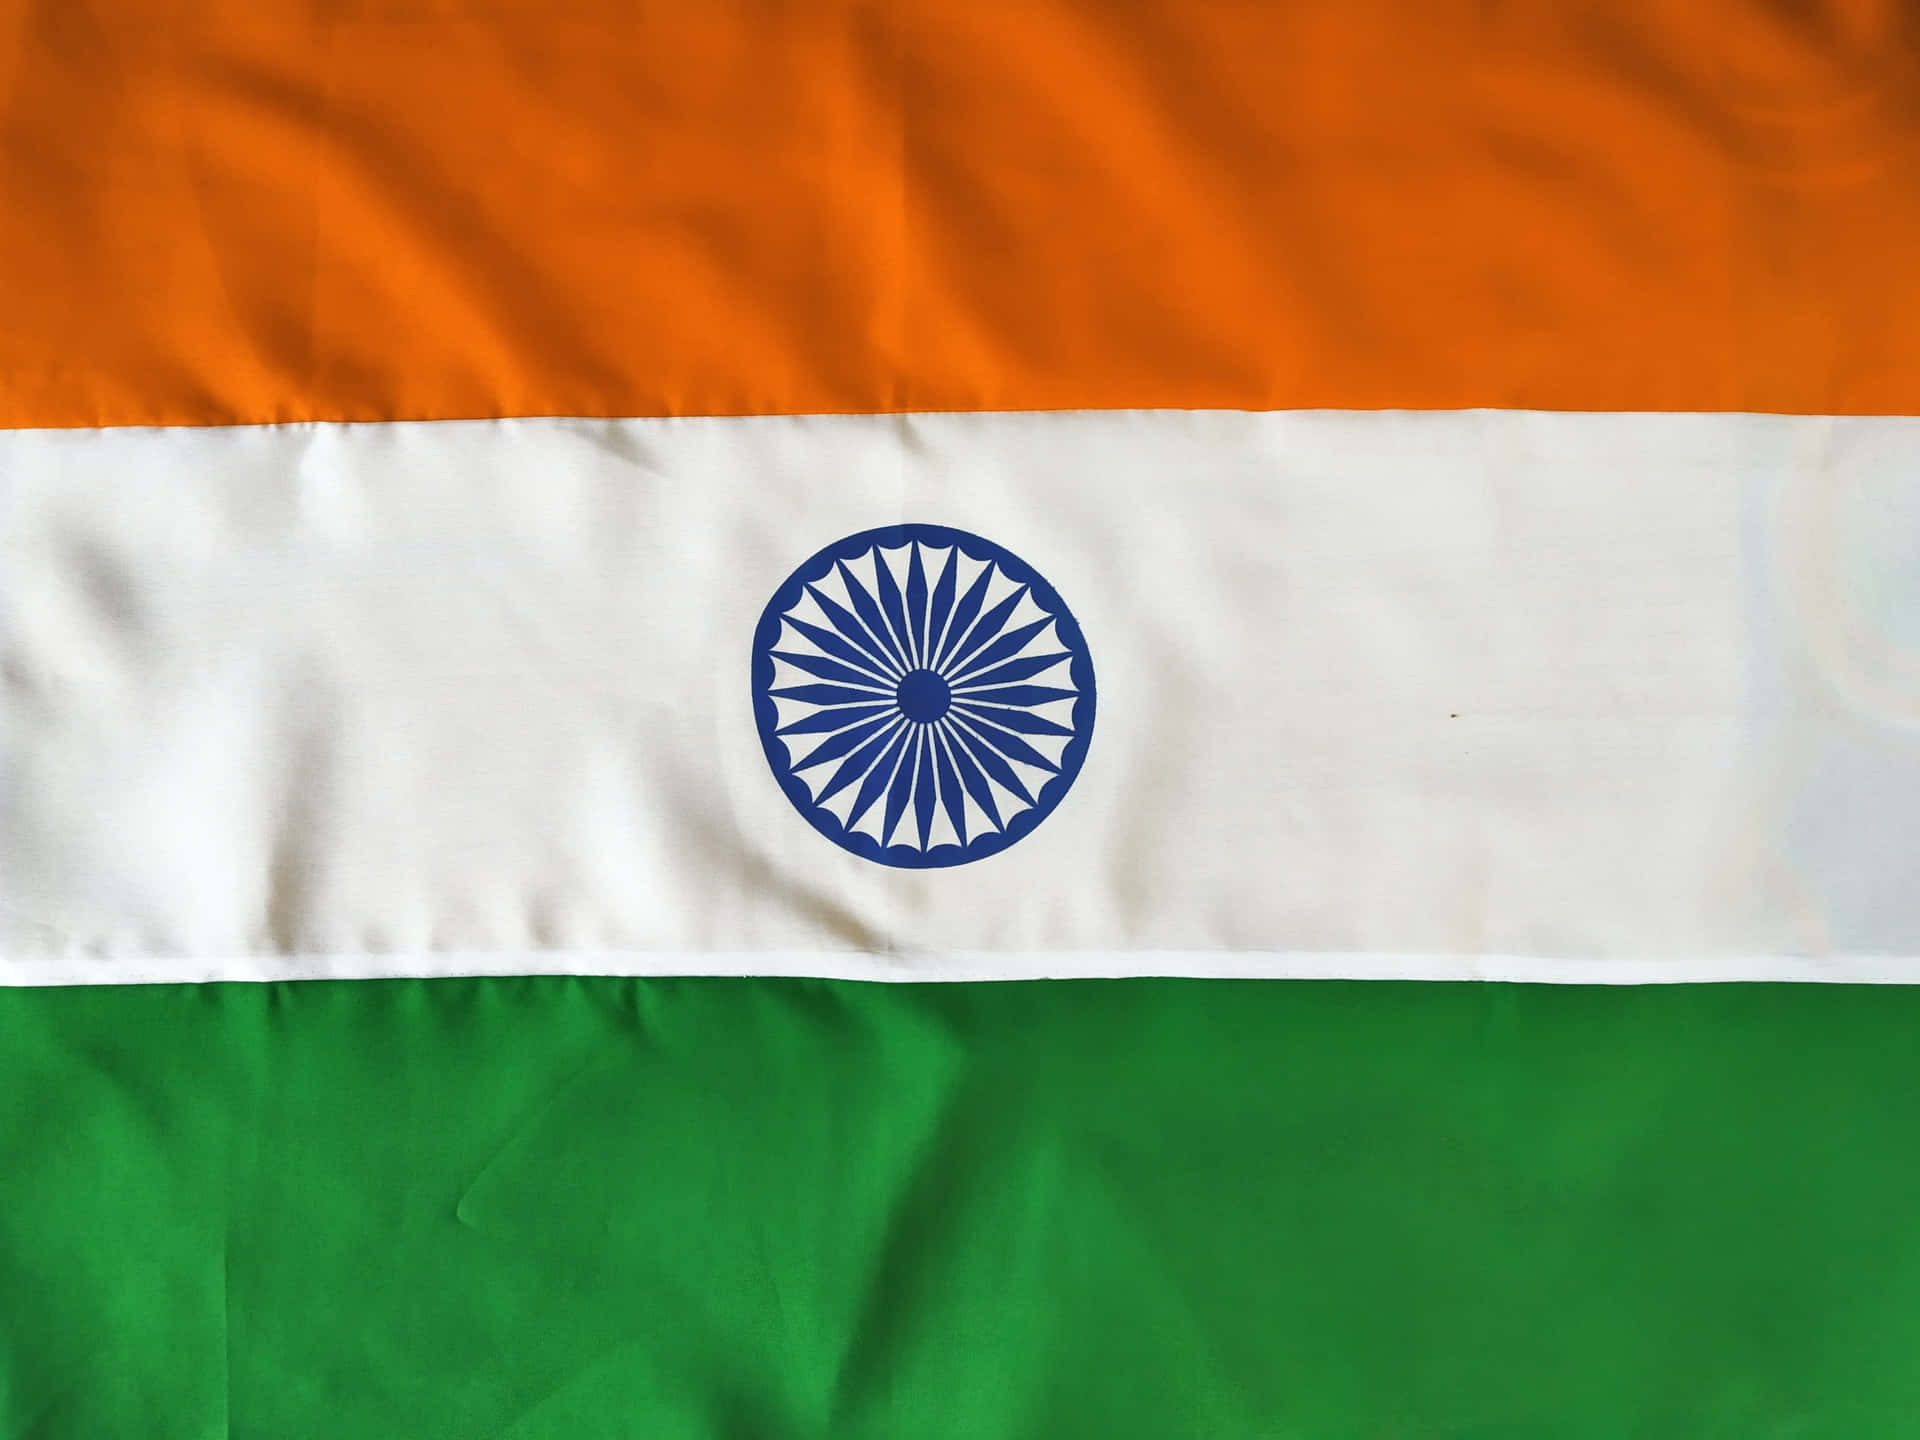 Celebrating Indian Flag and its rich history